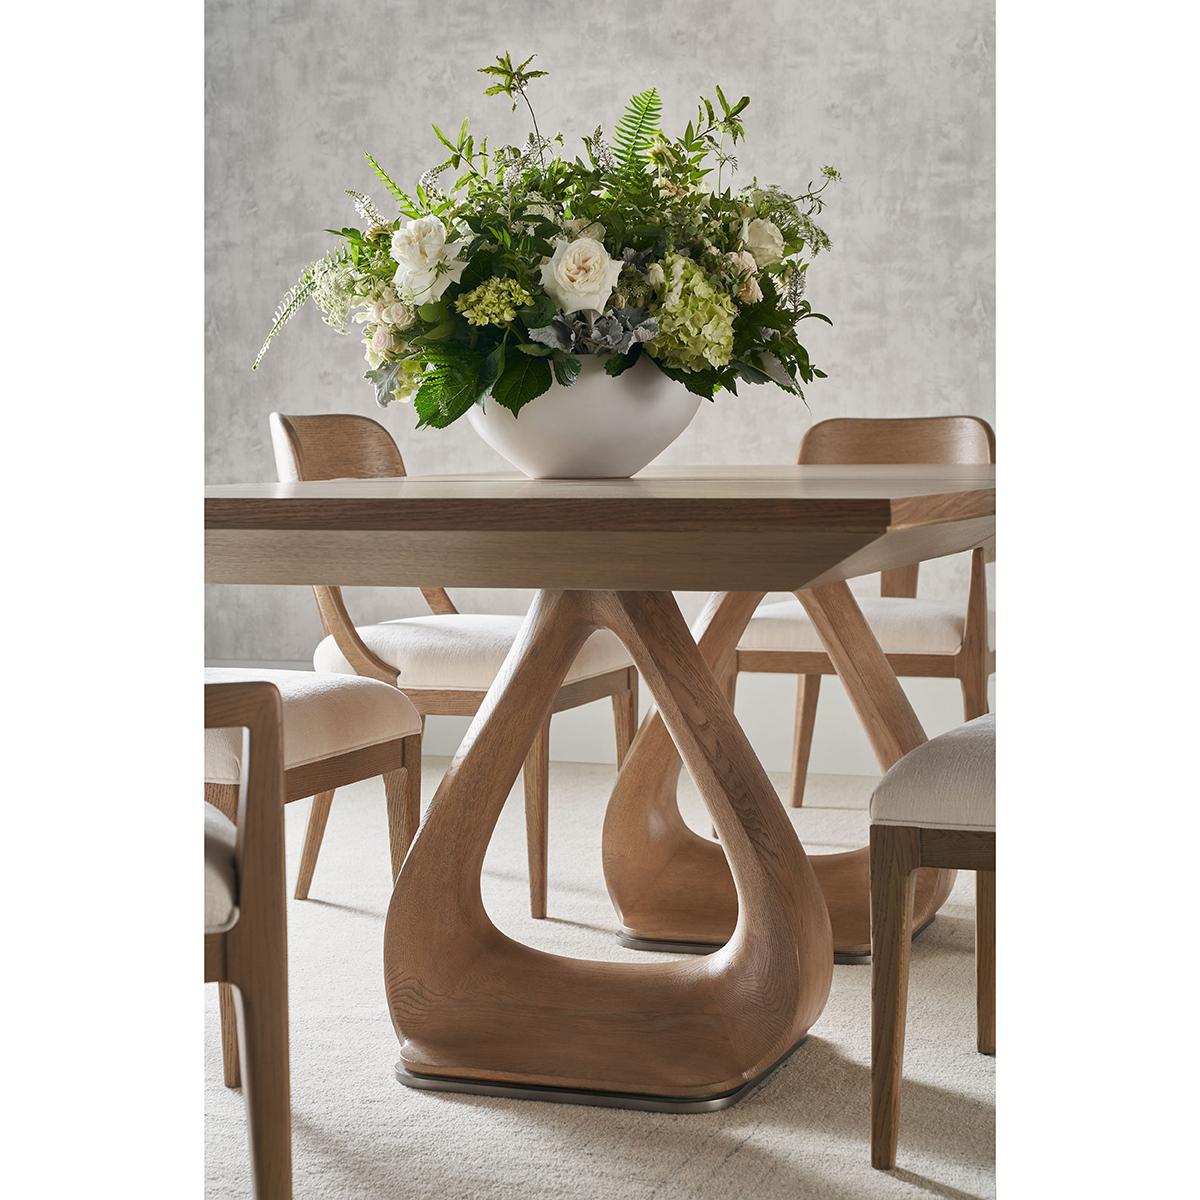 Masterfully crafted from oak, and finished in light blonde finish, this table showcases the natural beauty of the wood through its gentle, soft lines and a knife-edge top, creating a sophisticated and inviting atmosphere.

Featuring a unique shaped